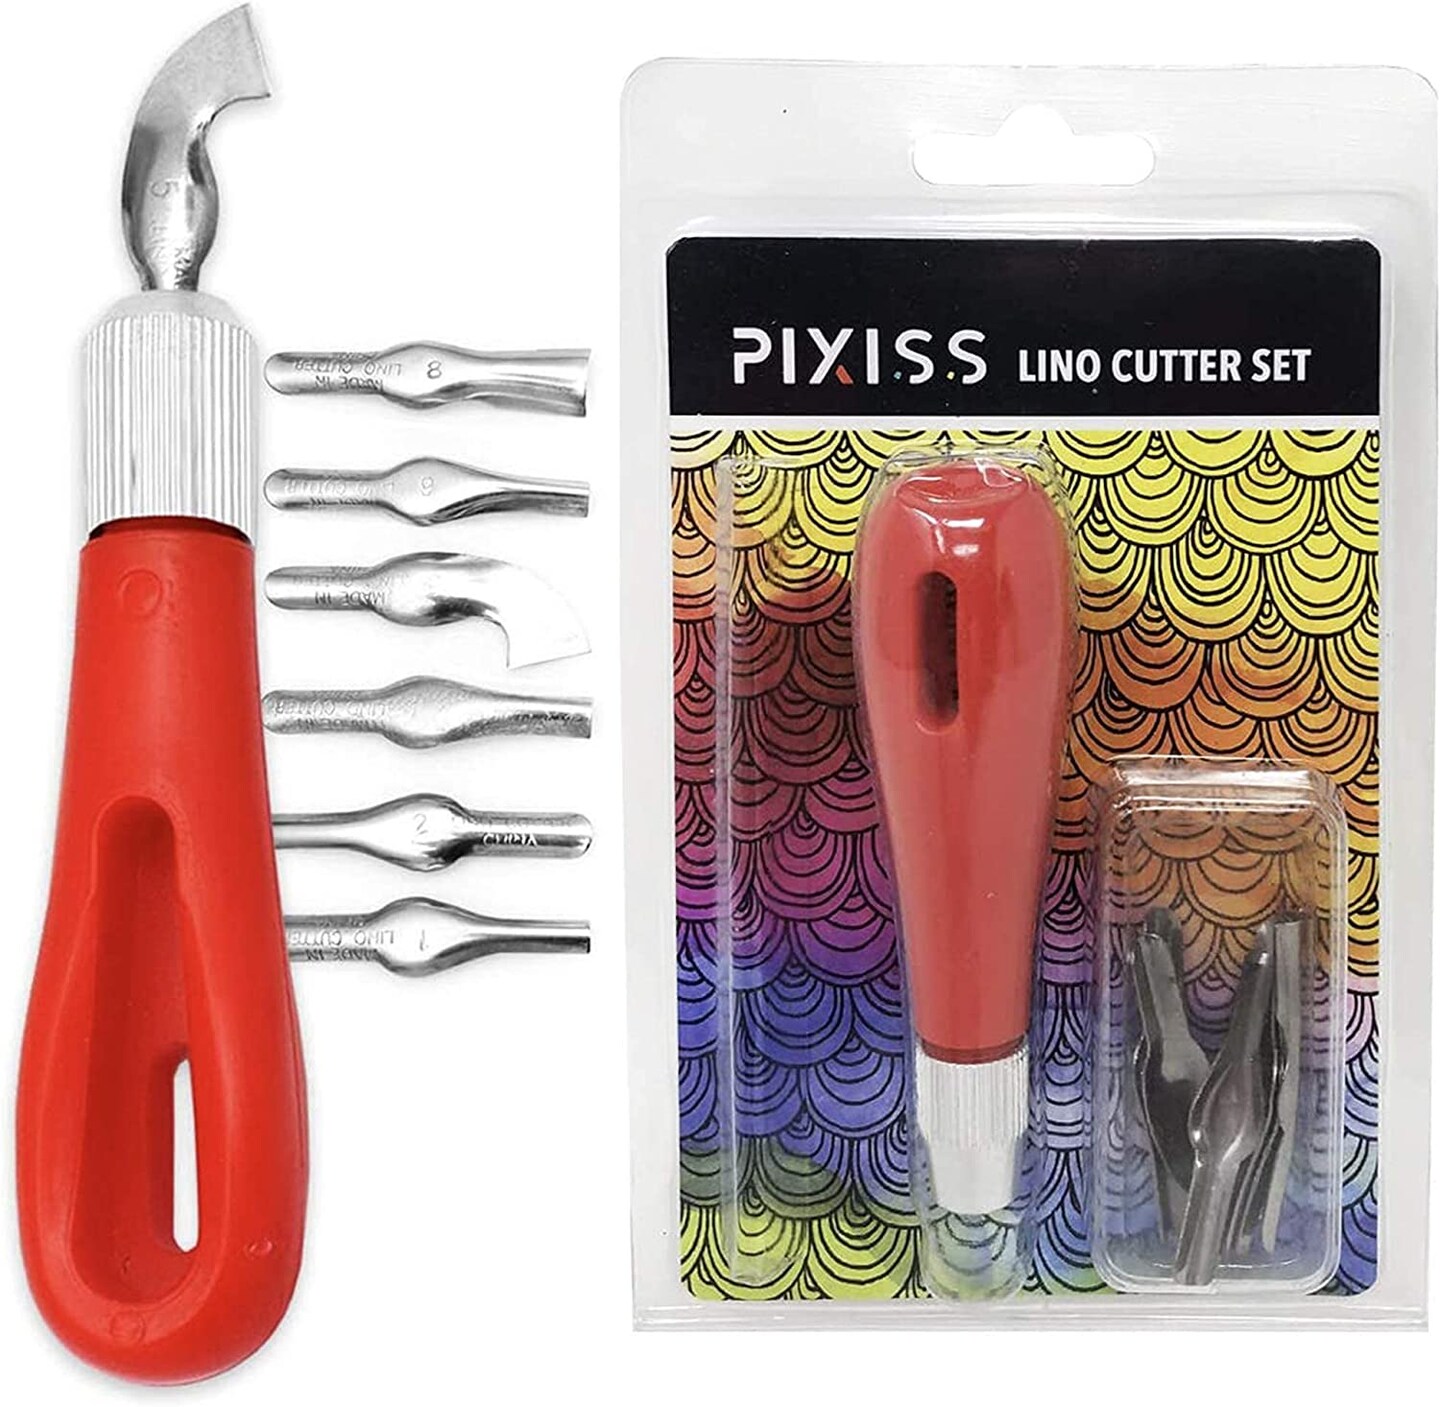 Pixiss Rubber Block Stamp Carving Blocks Stamp Making Kit with Cutter Tools  5-Pack